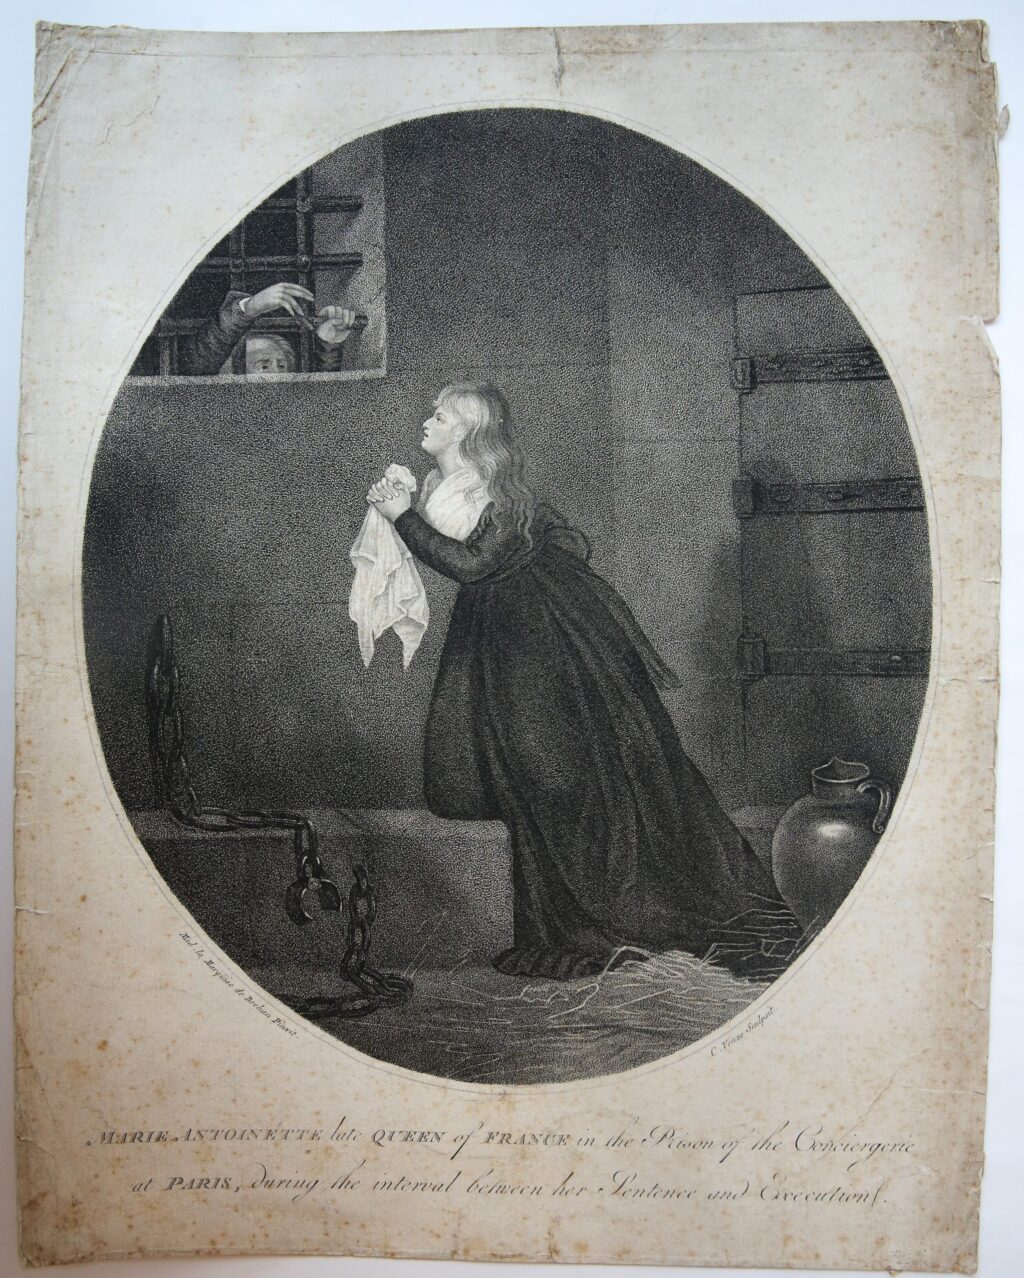 Engraving/Gravure: Marie Antoinette, late queen of France, in the prison of the Conciergerie at Paris, during the interval between her sentence and execution.